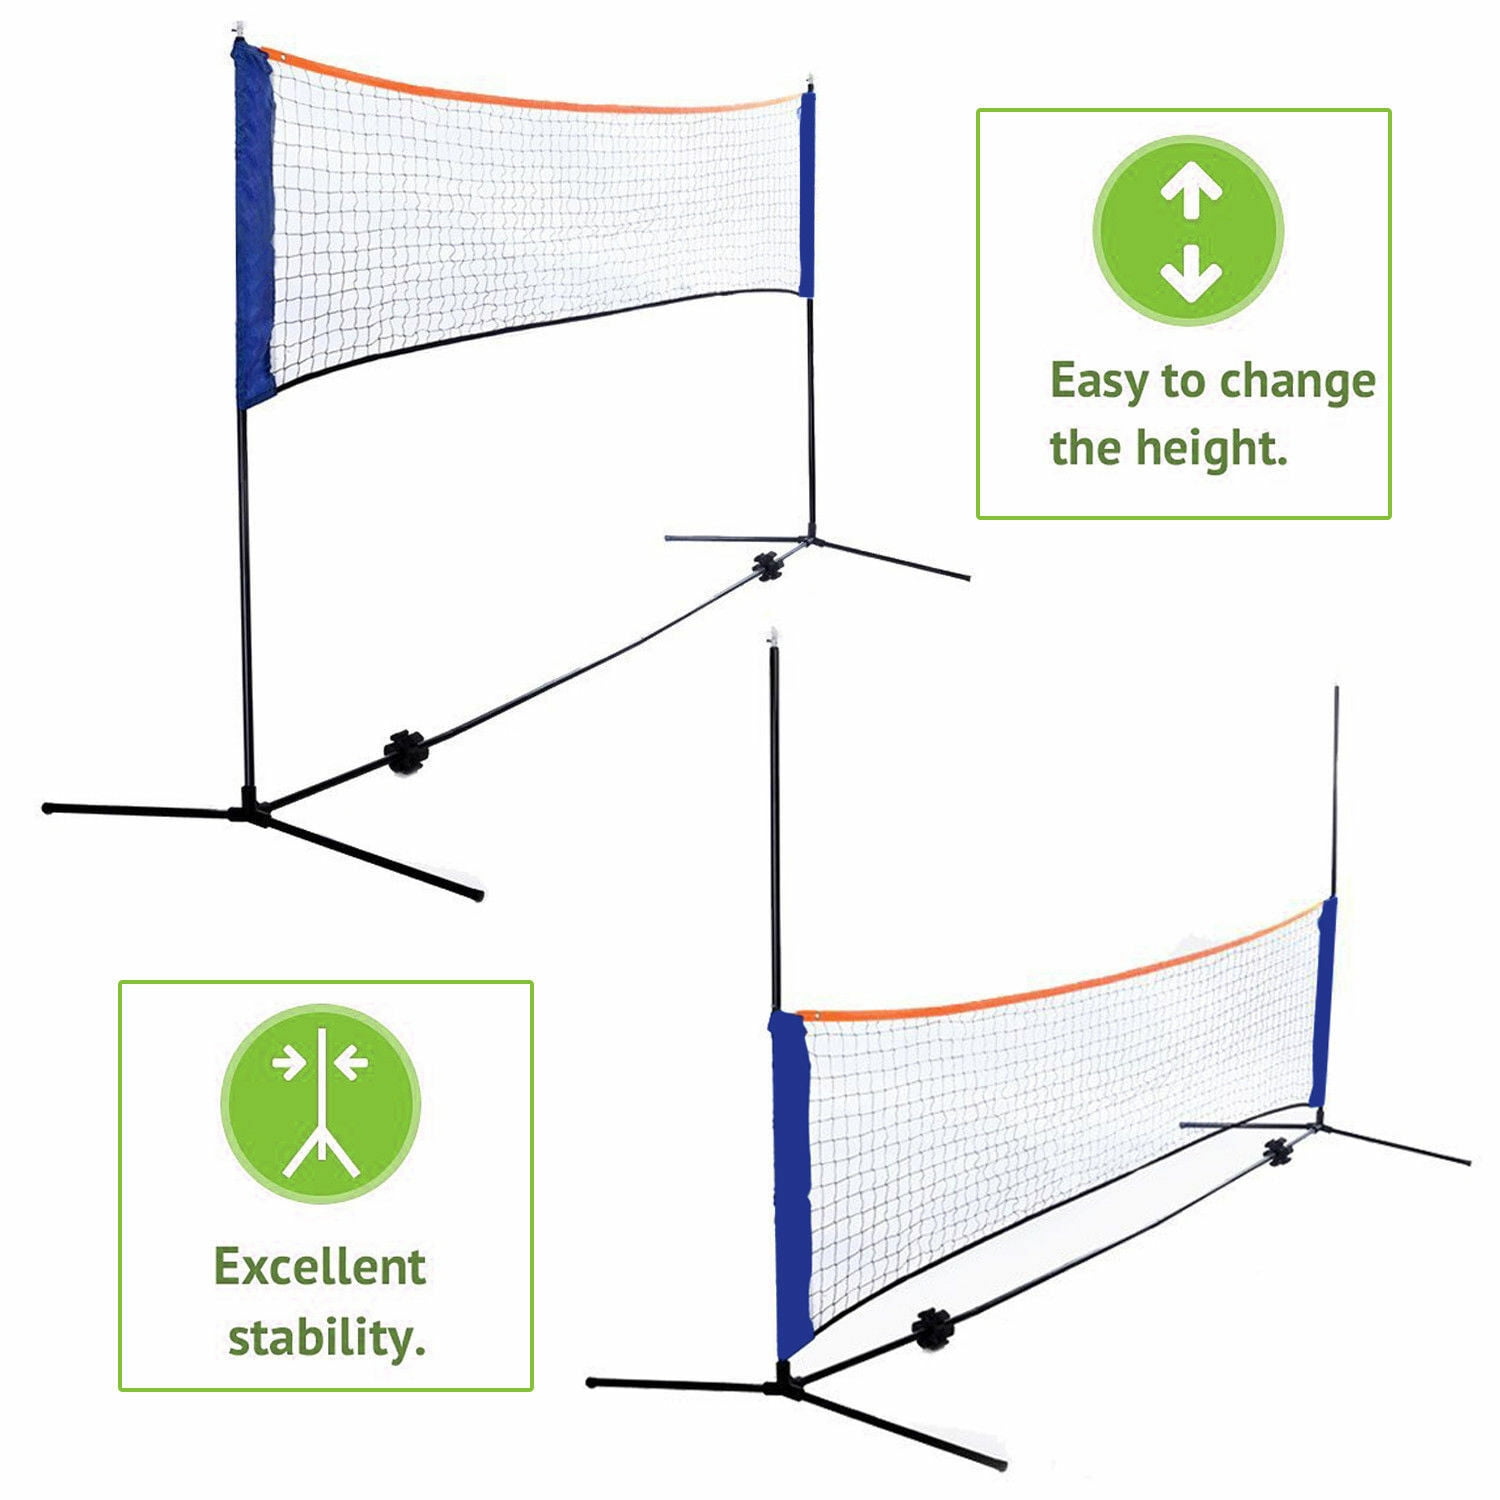 Carry Bag Portable Badminton 10 Feet Volleyball Tennis Net Set with Stand Frame